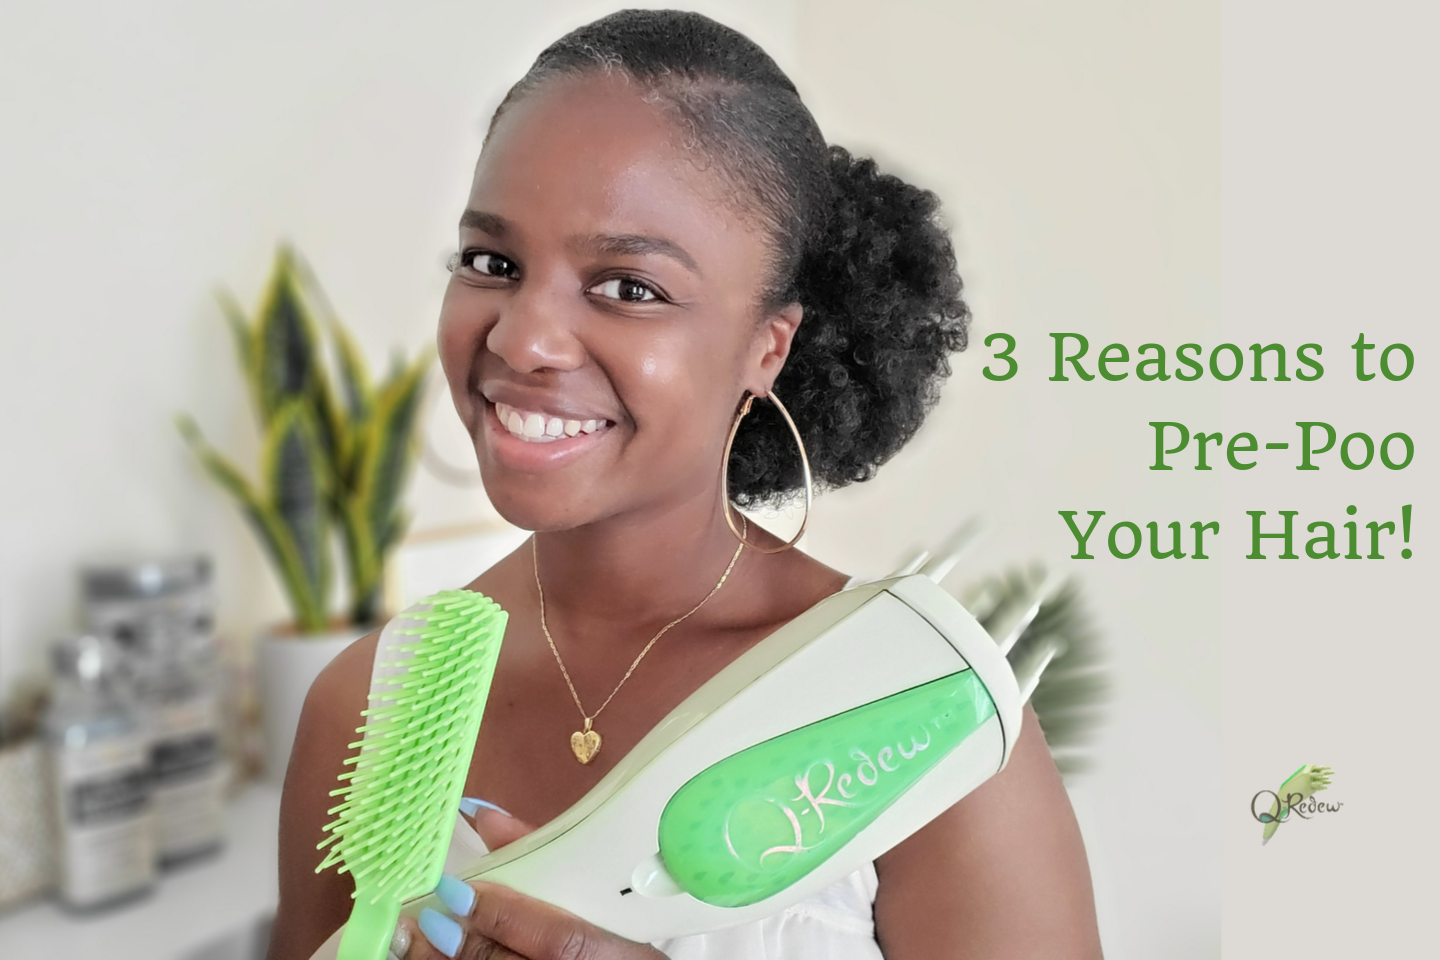 3 Reasons to Pre-Poo Your Hair with the Q-Redew!